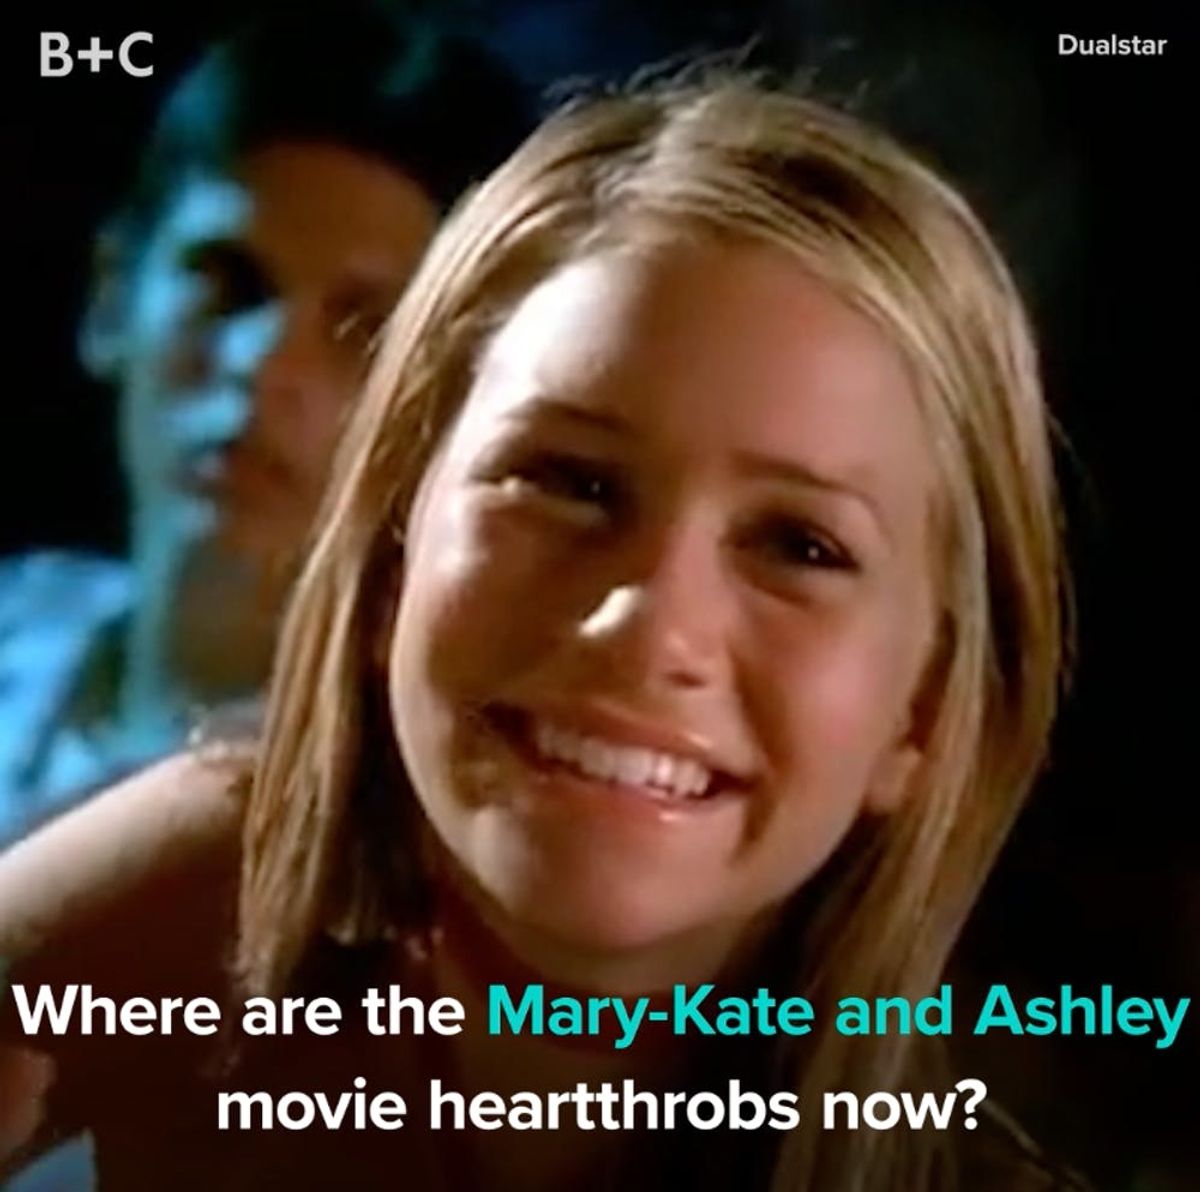 Where Are the Mary-Kate and Ashley Heartthrobs Now?